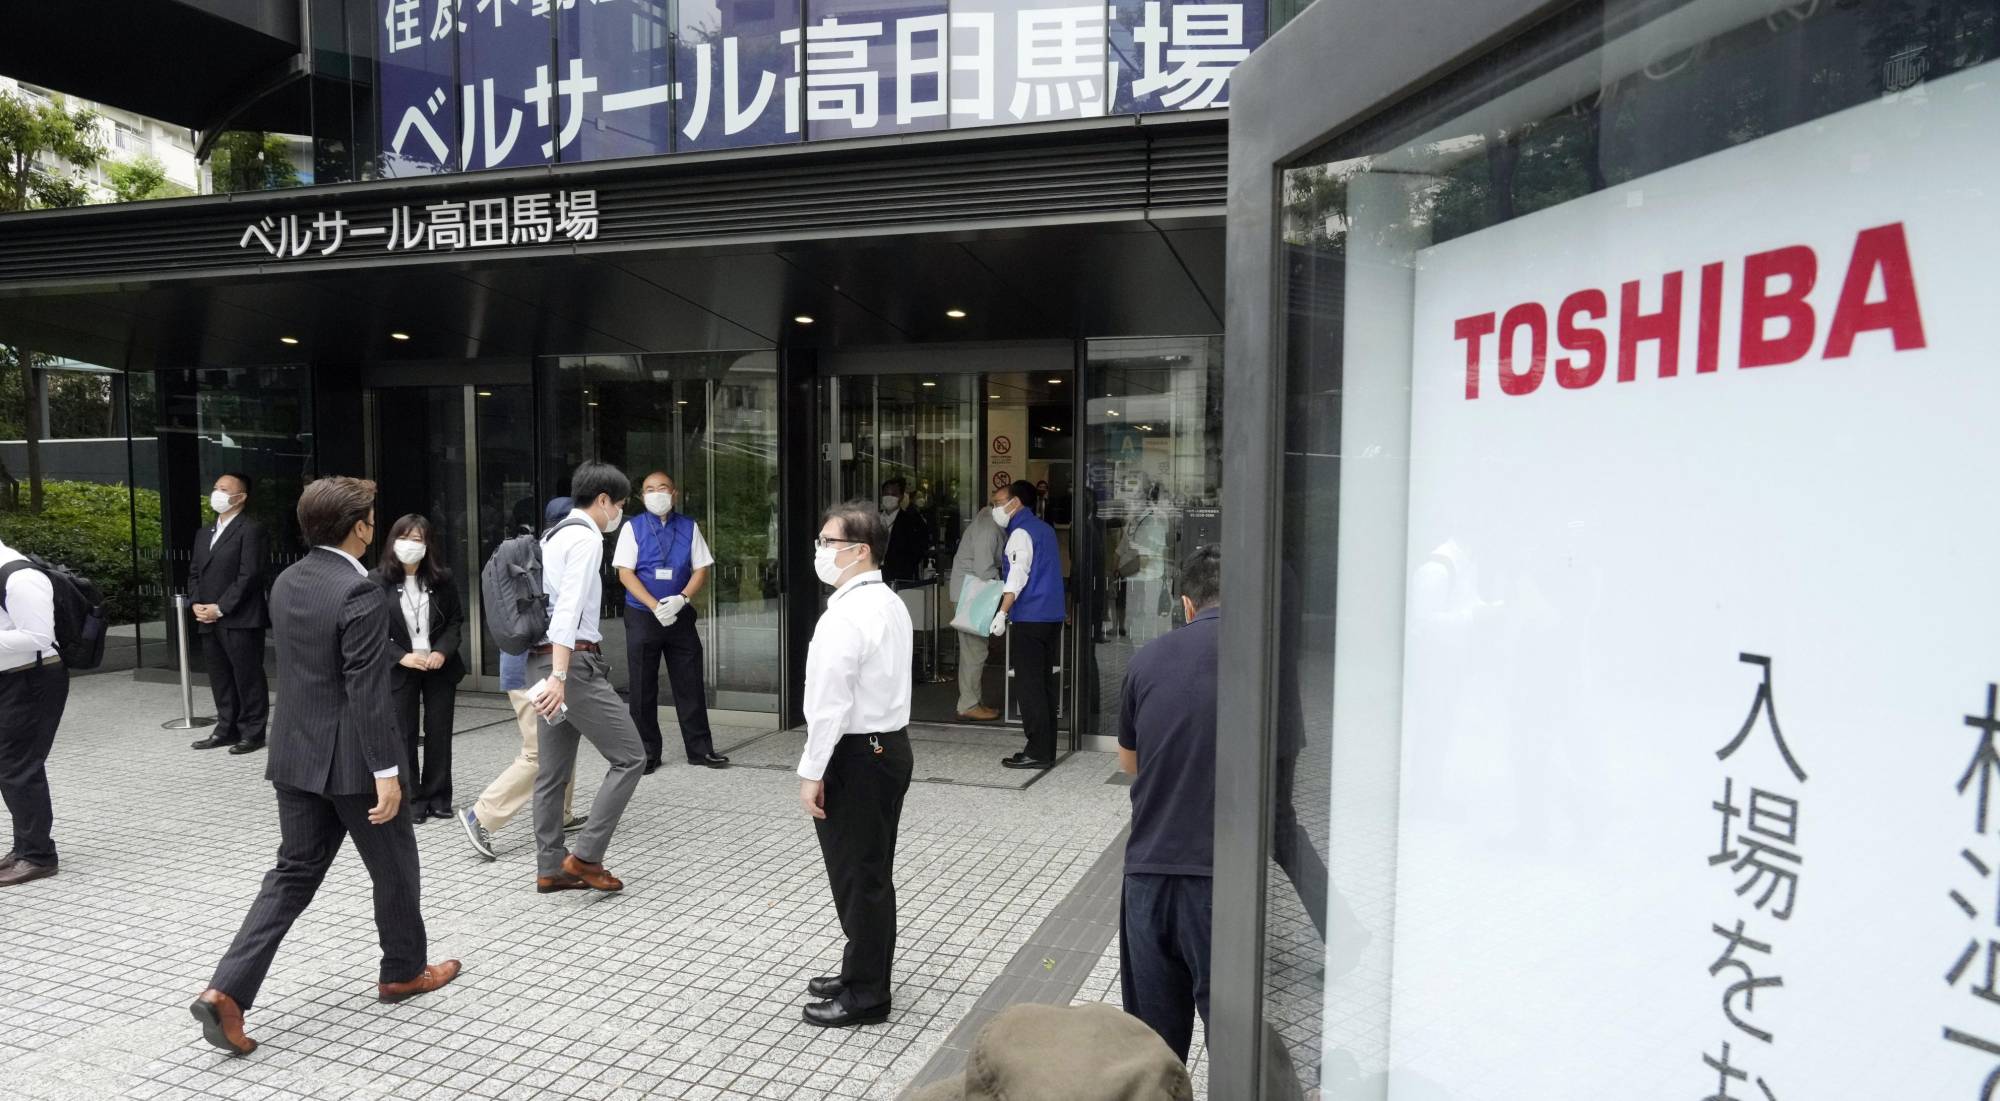 Attendees arrive at the Toshiba shareholders meeting in Tokyo's Shinjuku Ward on June 25. | KYODO